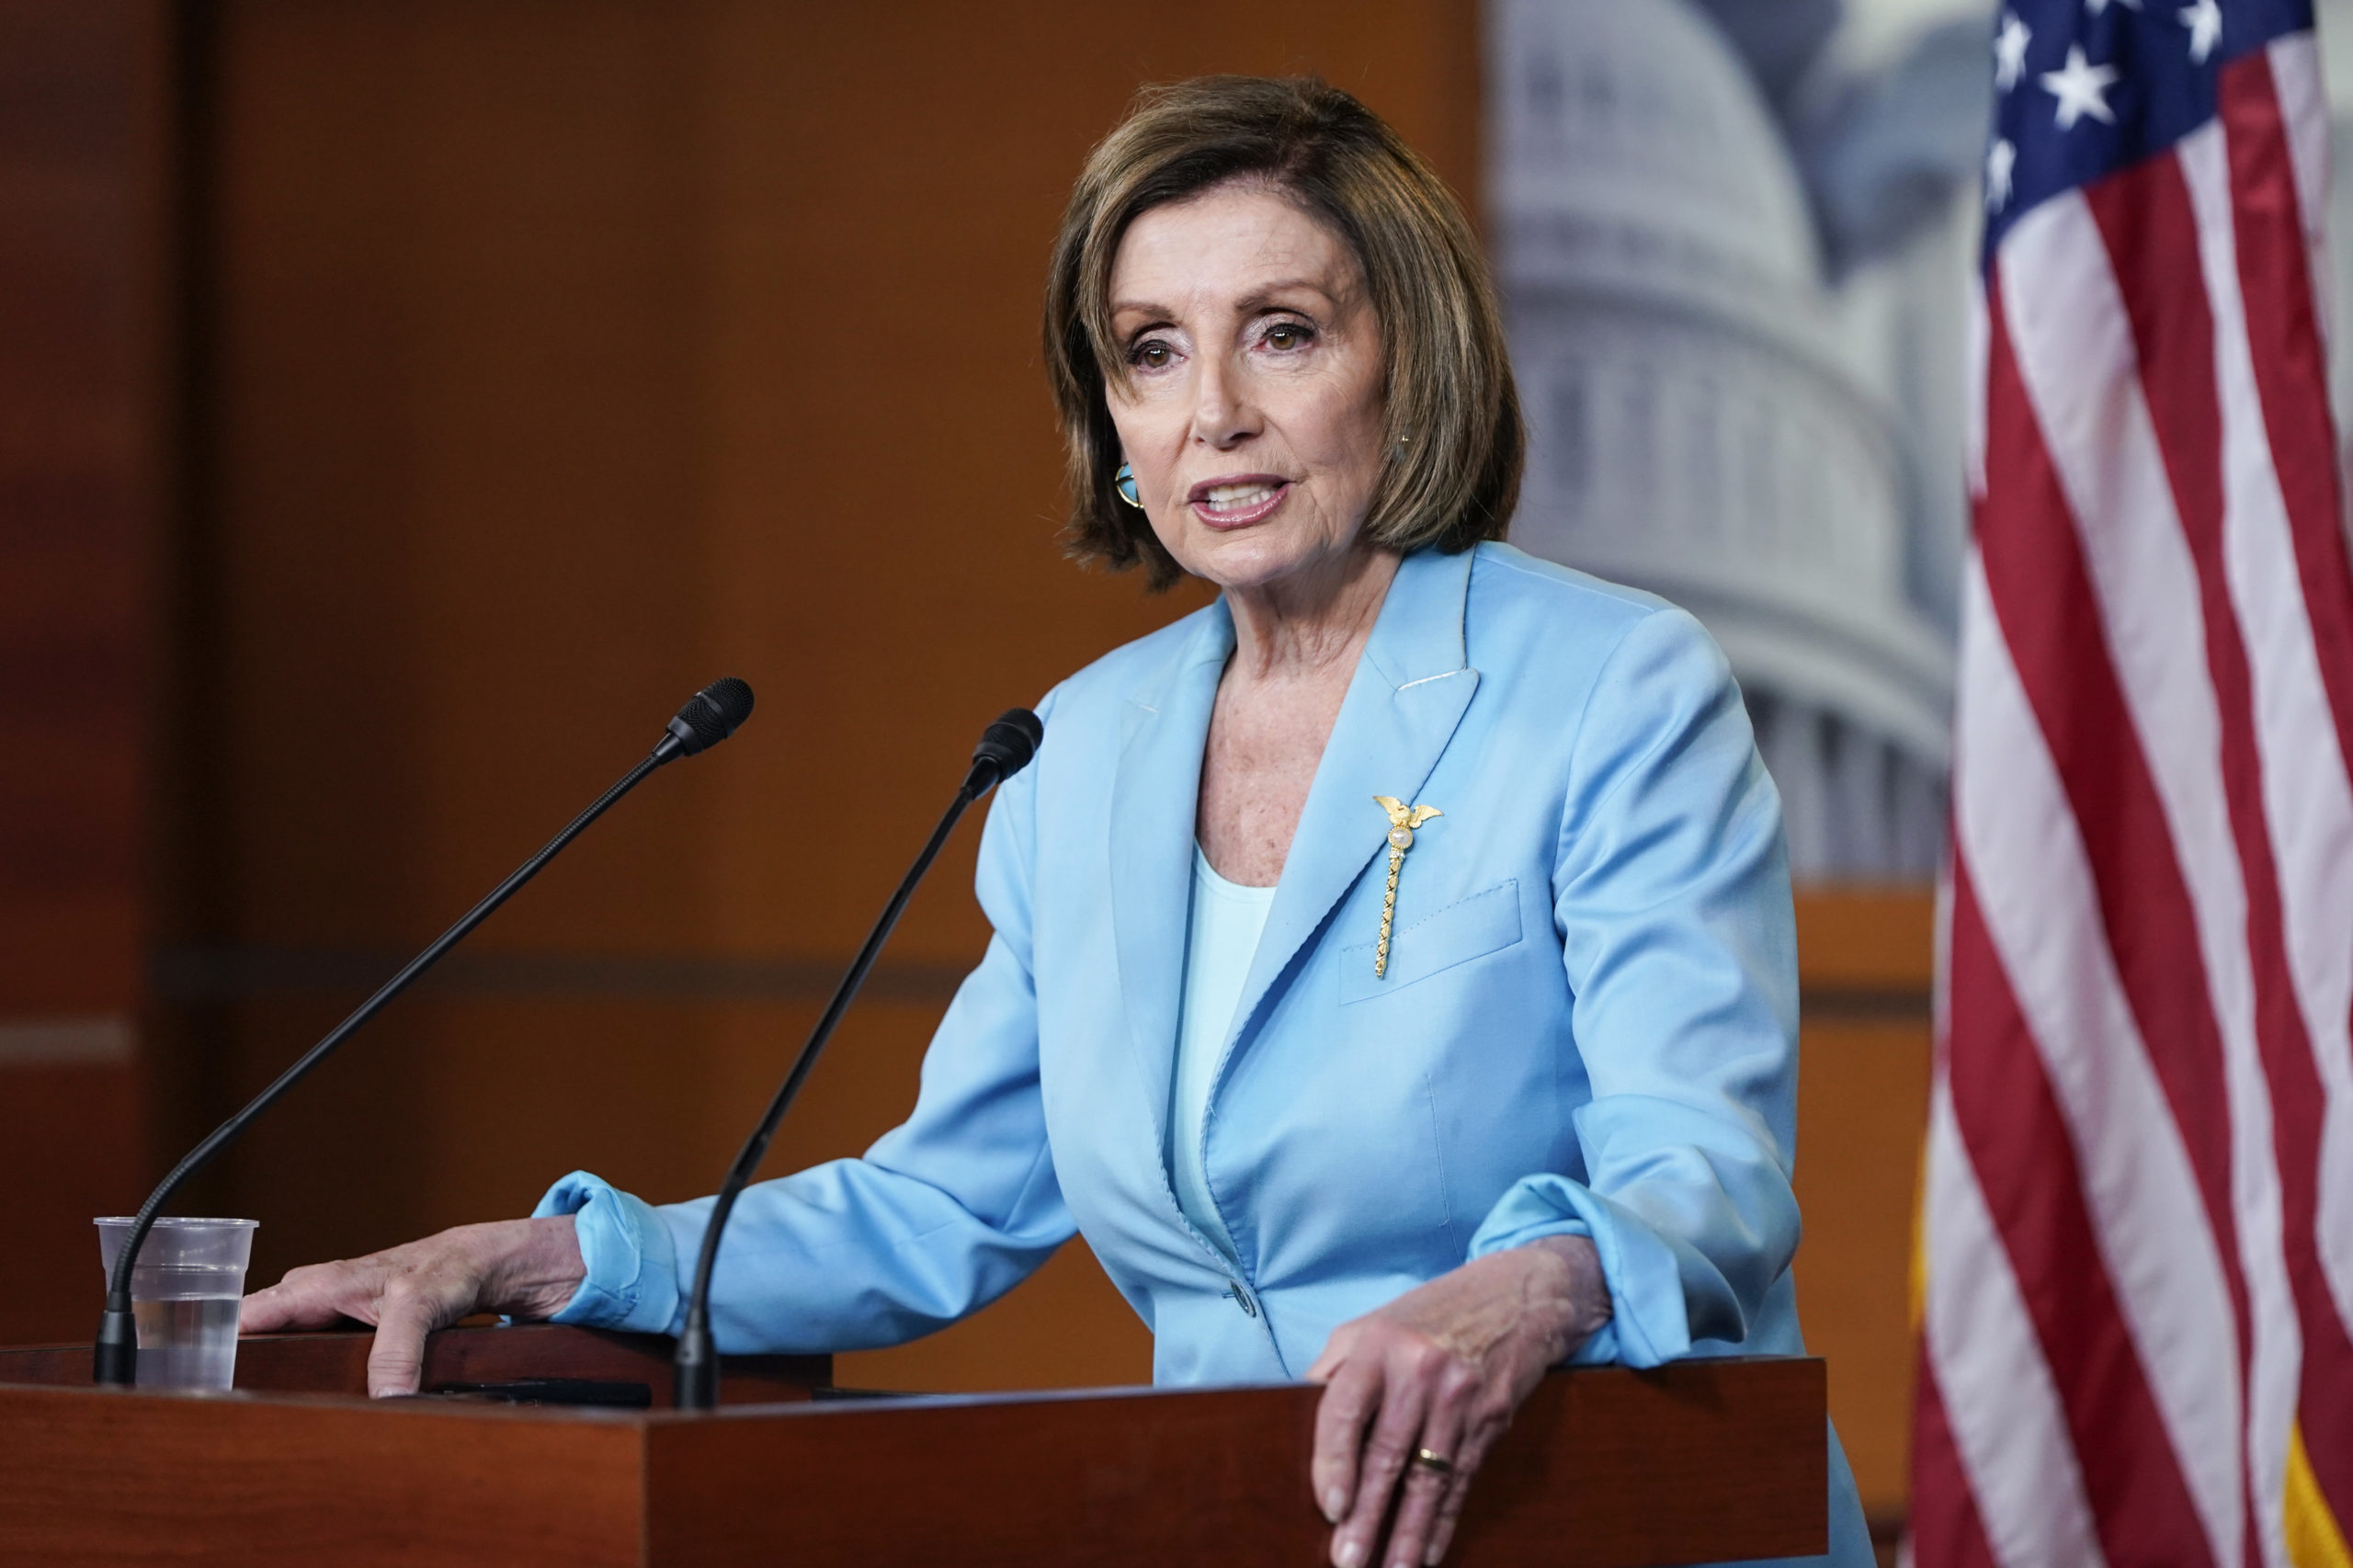 WASHINGTON, DC - JUNE 17: Speaker of the House Nancy Pelosi (D-CA) speaks during her weekly media availability on Capitol Hill on June 17, 2021 in Washington, DC. (Photo by Joshua Roberts/Getty Images)